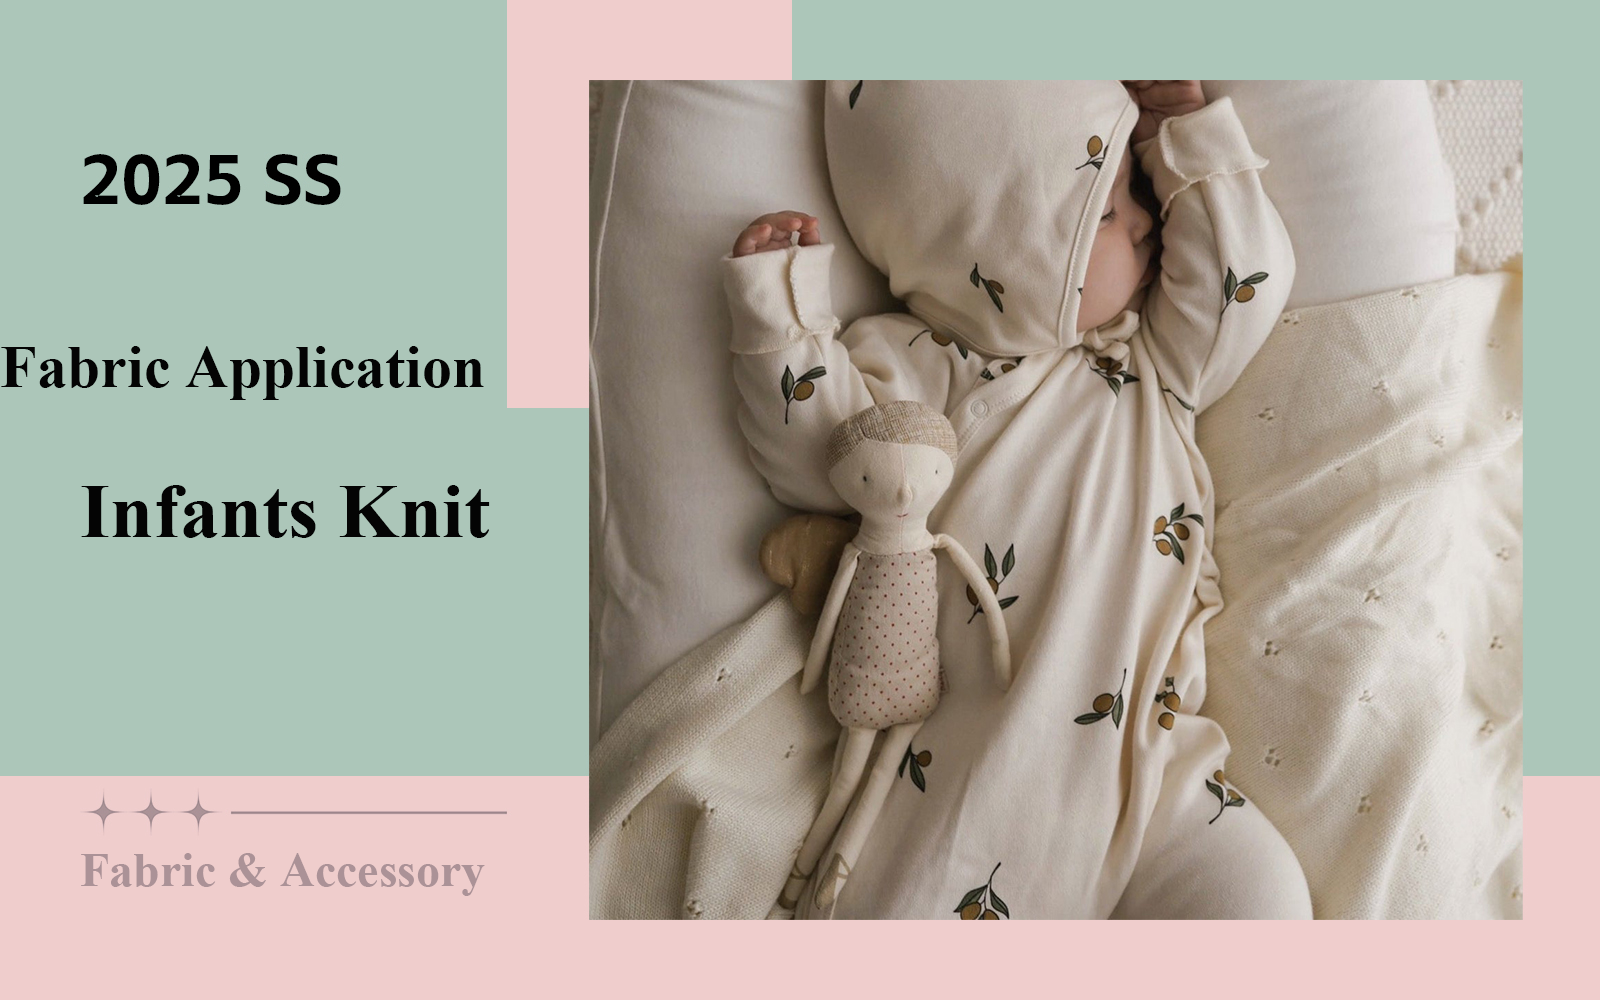 The Fabric Trend for Infants Knit